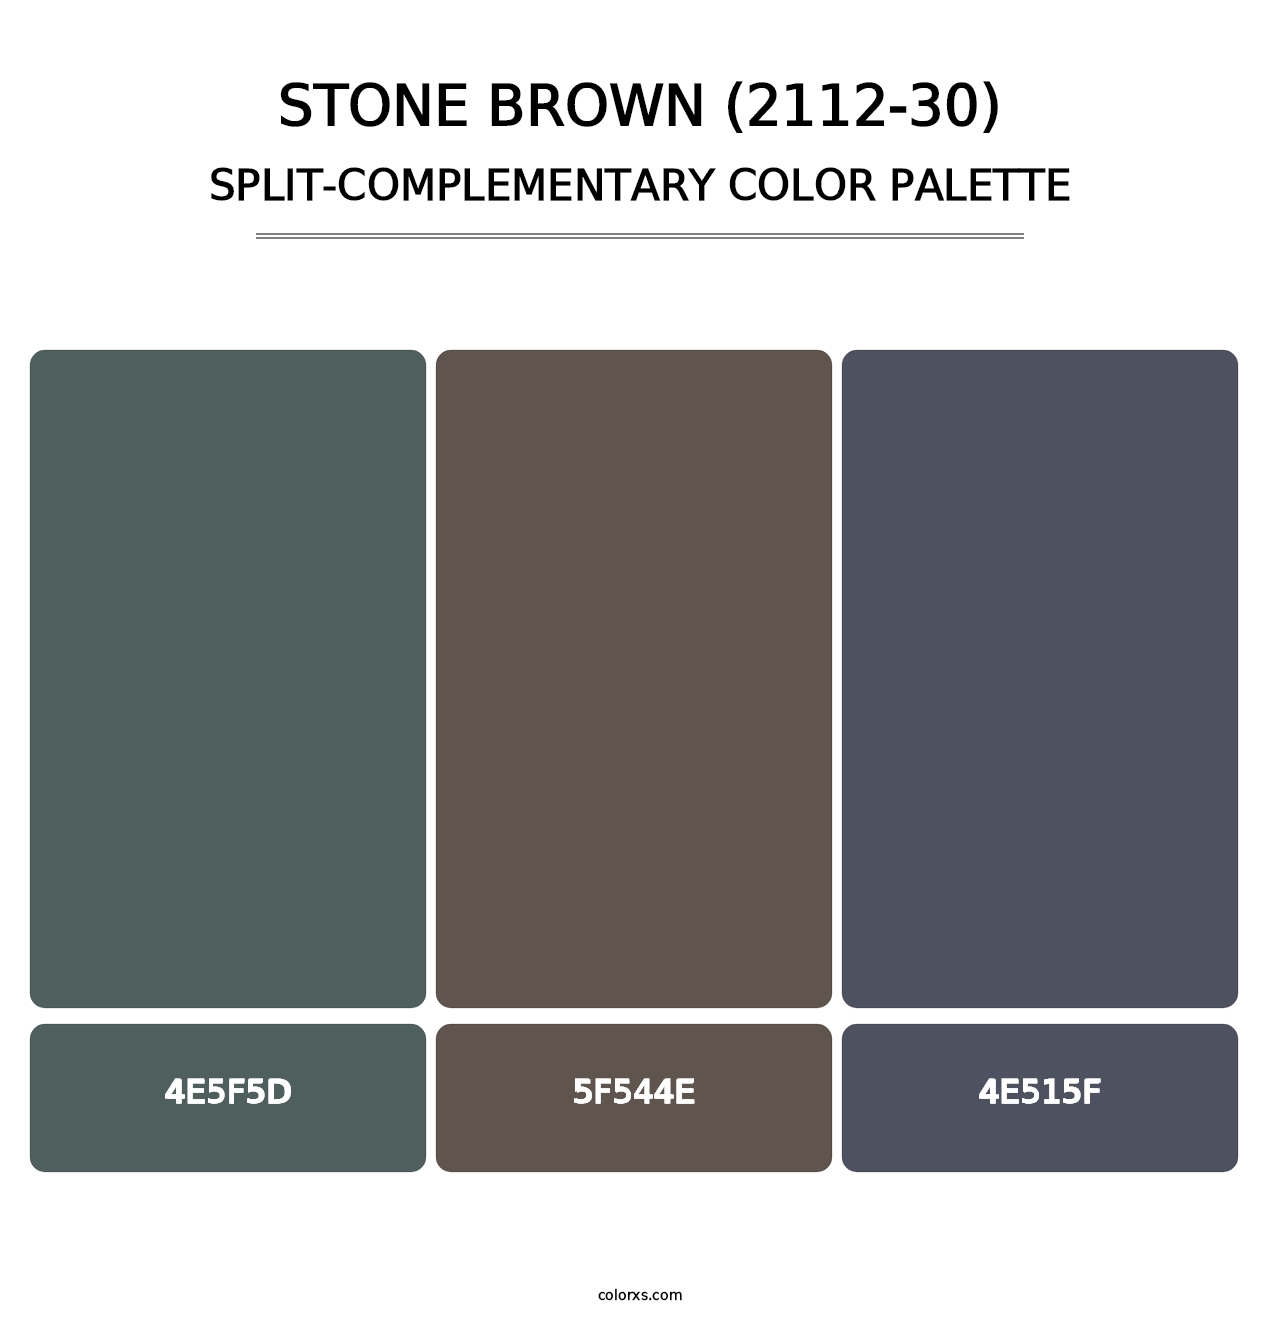 Stone Brown (2112-30) - Split-Complementary Color Palette